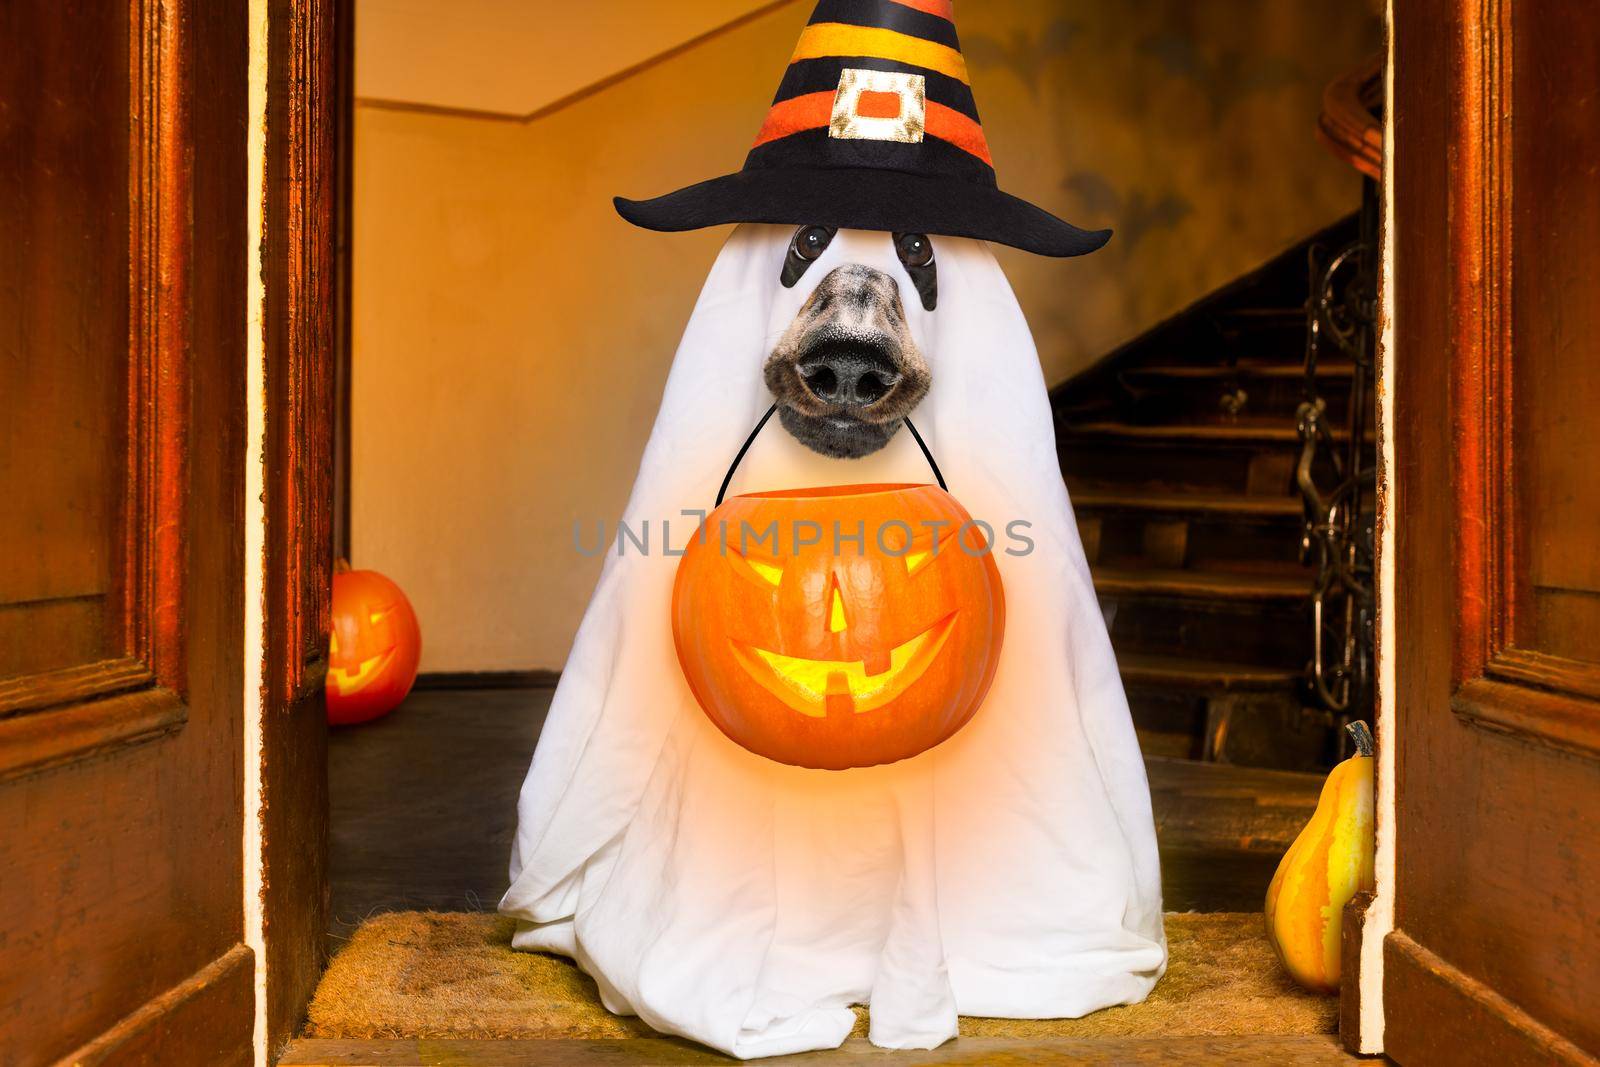 dog sit as a ghost for halloween in front of the door  at home entrance with pumpkin lantern or  light , scary and spooky